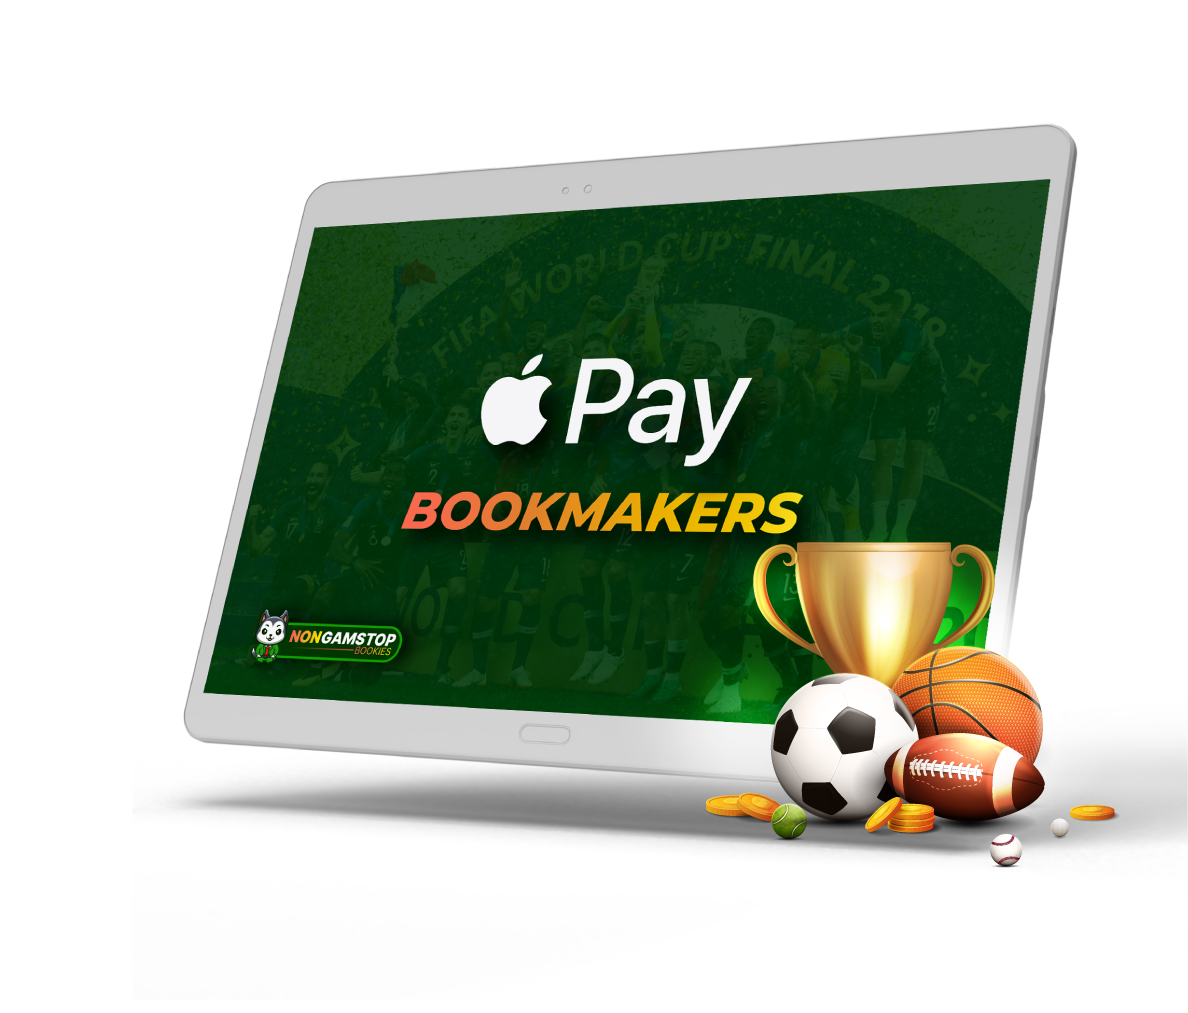 Apple Pay Non GamStop Bookmakers